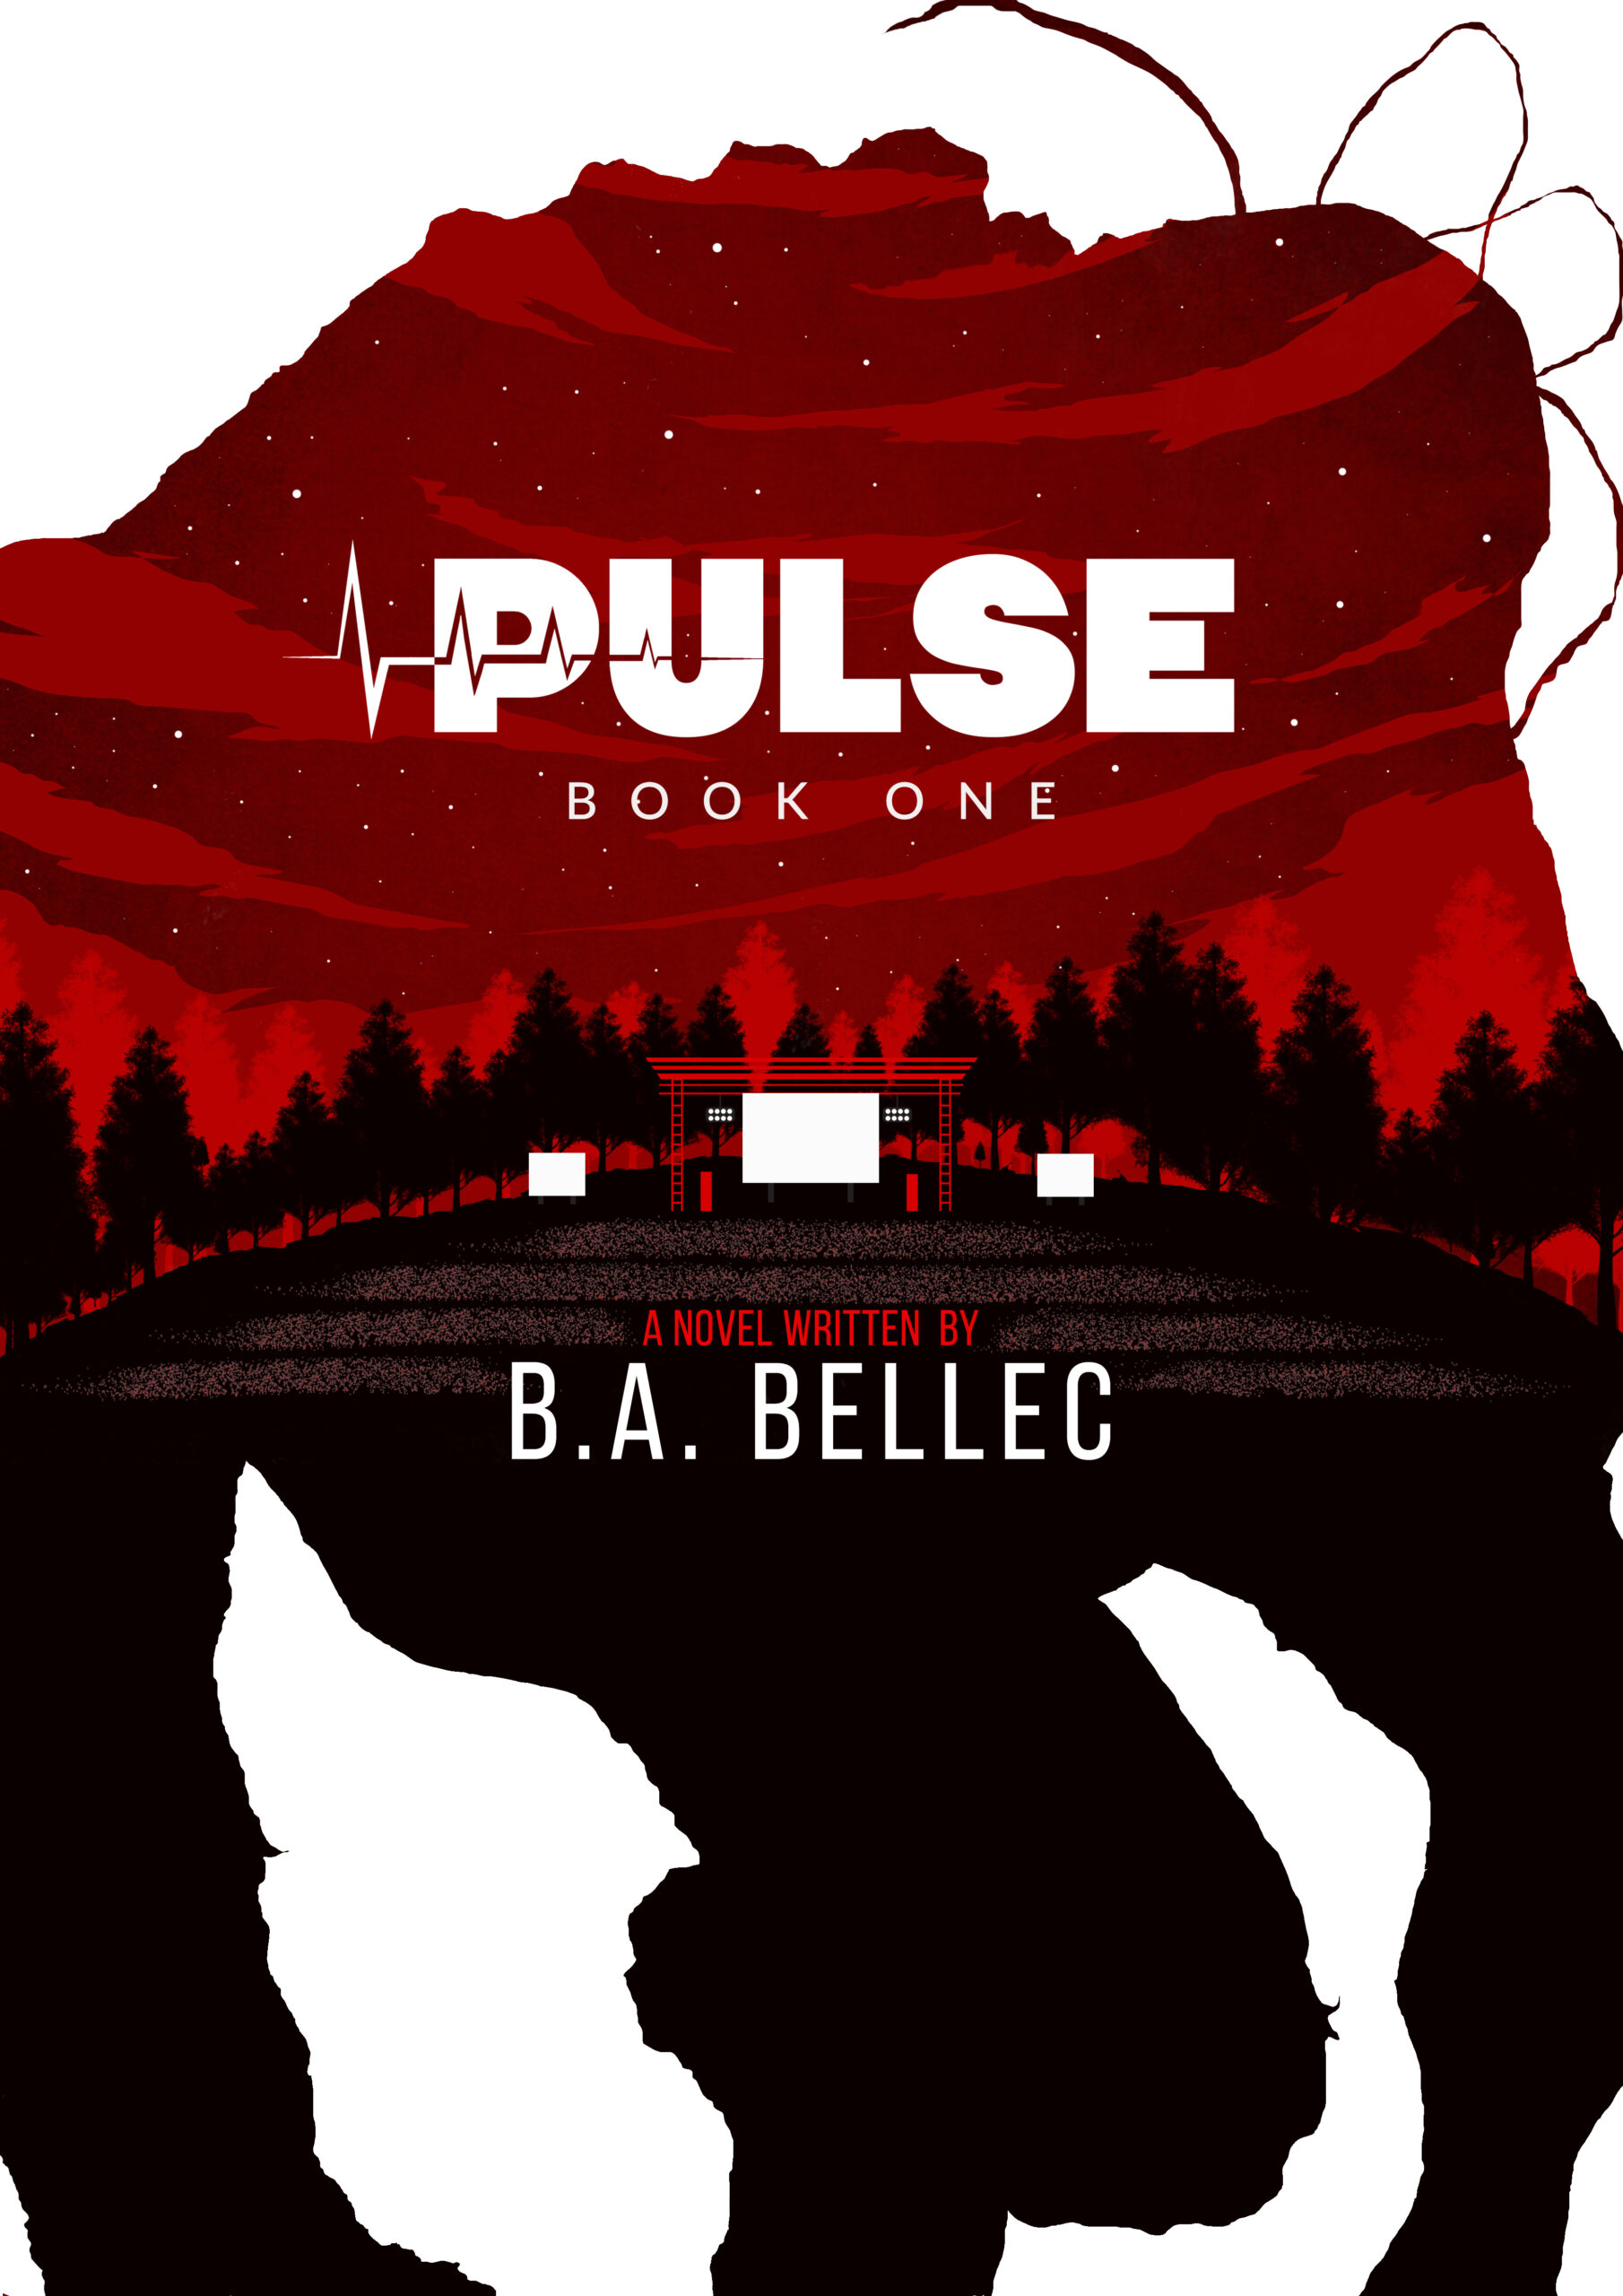 Pulse book one by B.A. Bellec